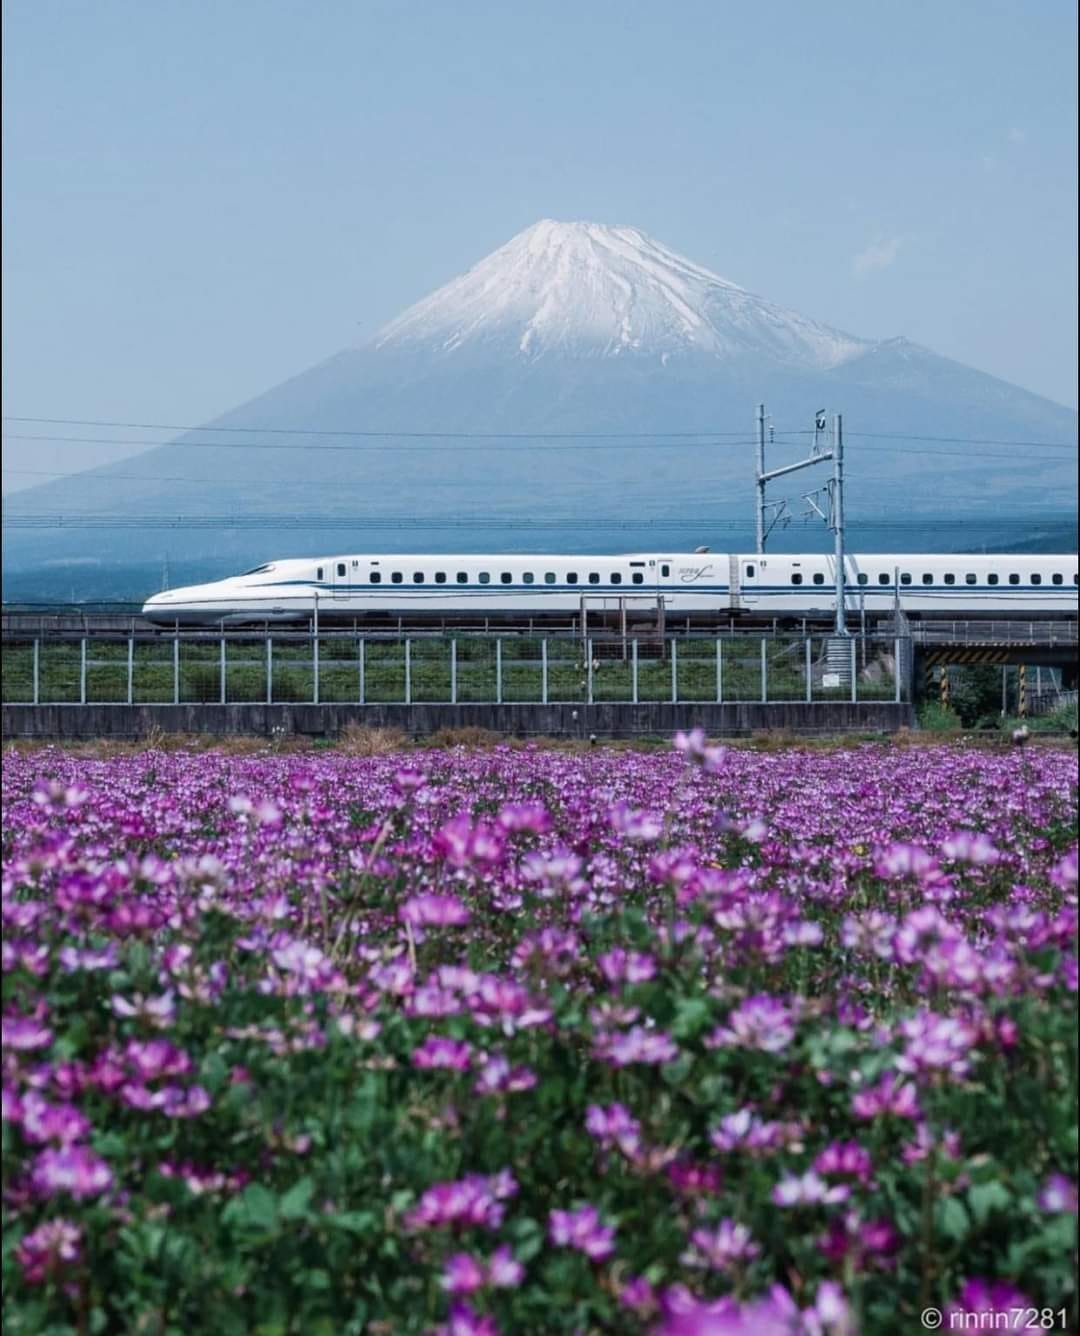 Train fares in Japan vary depending on factors like distance, speed, and class of service. On average, expect to pay around ¥10,000 (approximately $90 USD) for a one-way Shinkansen journey between major cities